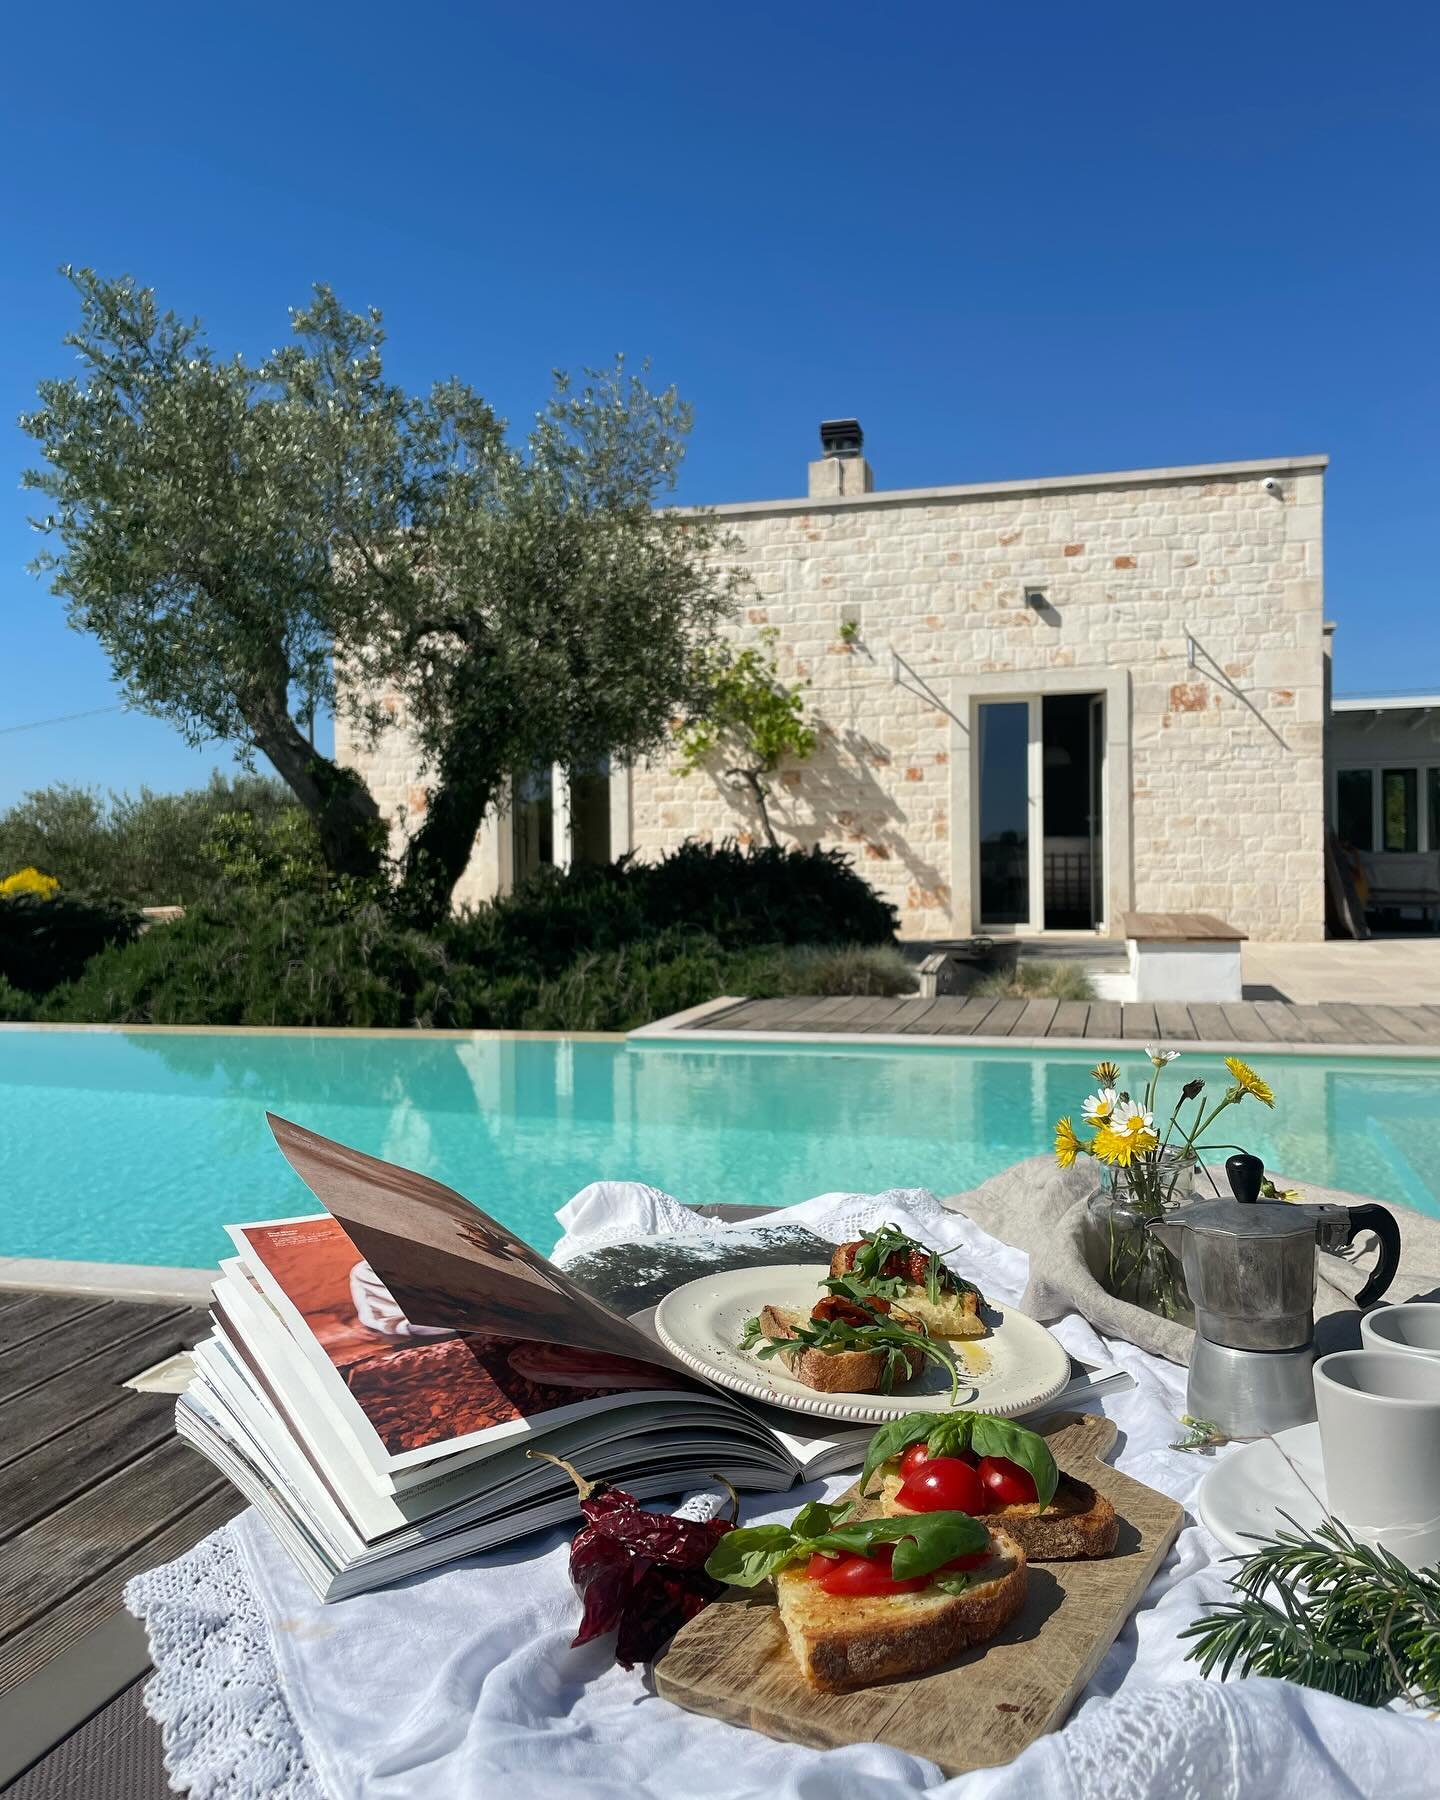 SUNDAY ☀️
Let the beautiful weather be the start of something wonderful. Blue skies, serenity and chance to reset your mind.
.
.
.
.
.
.
.
.
.
#puglia#slowliving#countryliving#weareinpuglia#serenity#alberobello#martinafranca#pugliabella#southernitaly